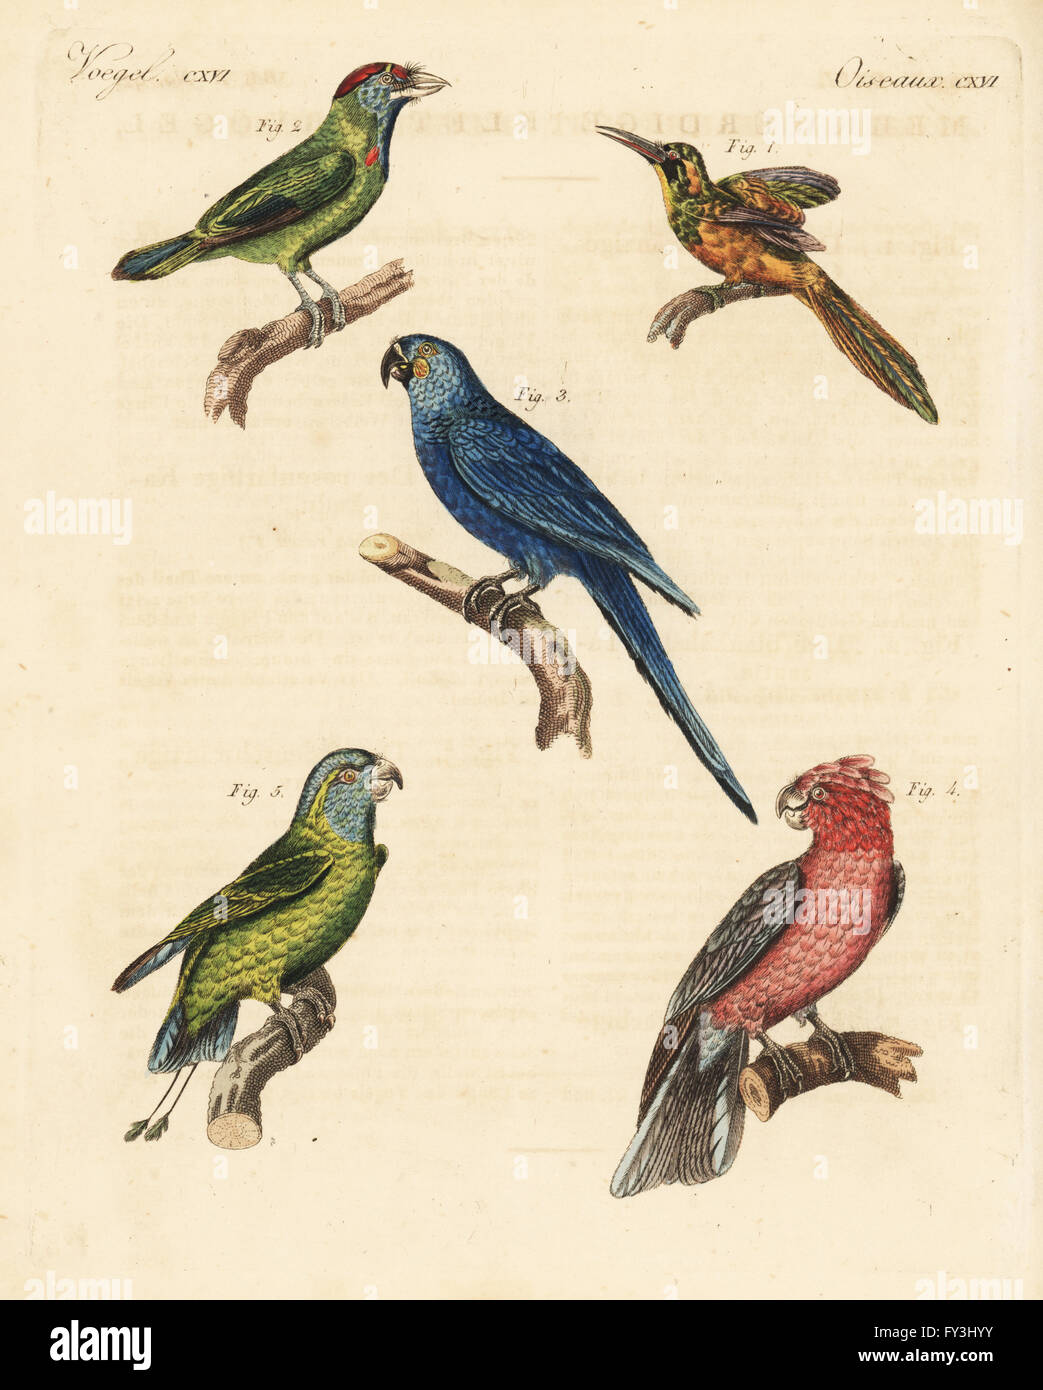 Rufous-tailed jacamar, Galbula ruficauda, female 1, blue-throated barbet, Megalaima asiatica 2, hyacinth macaw, Anodorhynchus hyacinthinus 3, galah, Eolophus roseicapilla 4, and blue-crowned or mindoro racquet-tail, Prioniturus discurus 5. Handcoloured copperplate engraving from Friedrich Johann Bertuch's Bilderbuch fur Kinder (Picture Book for Children), Weimar, 1823. Stock Photo